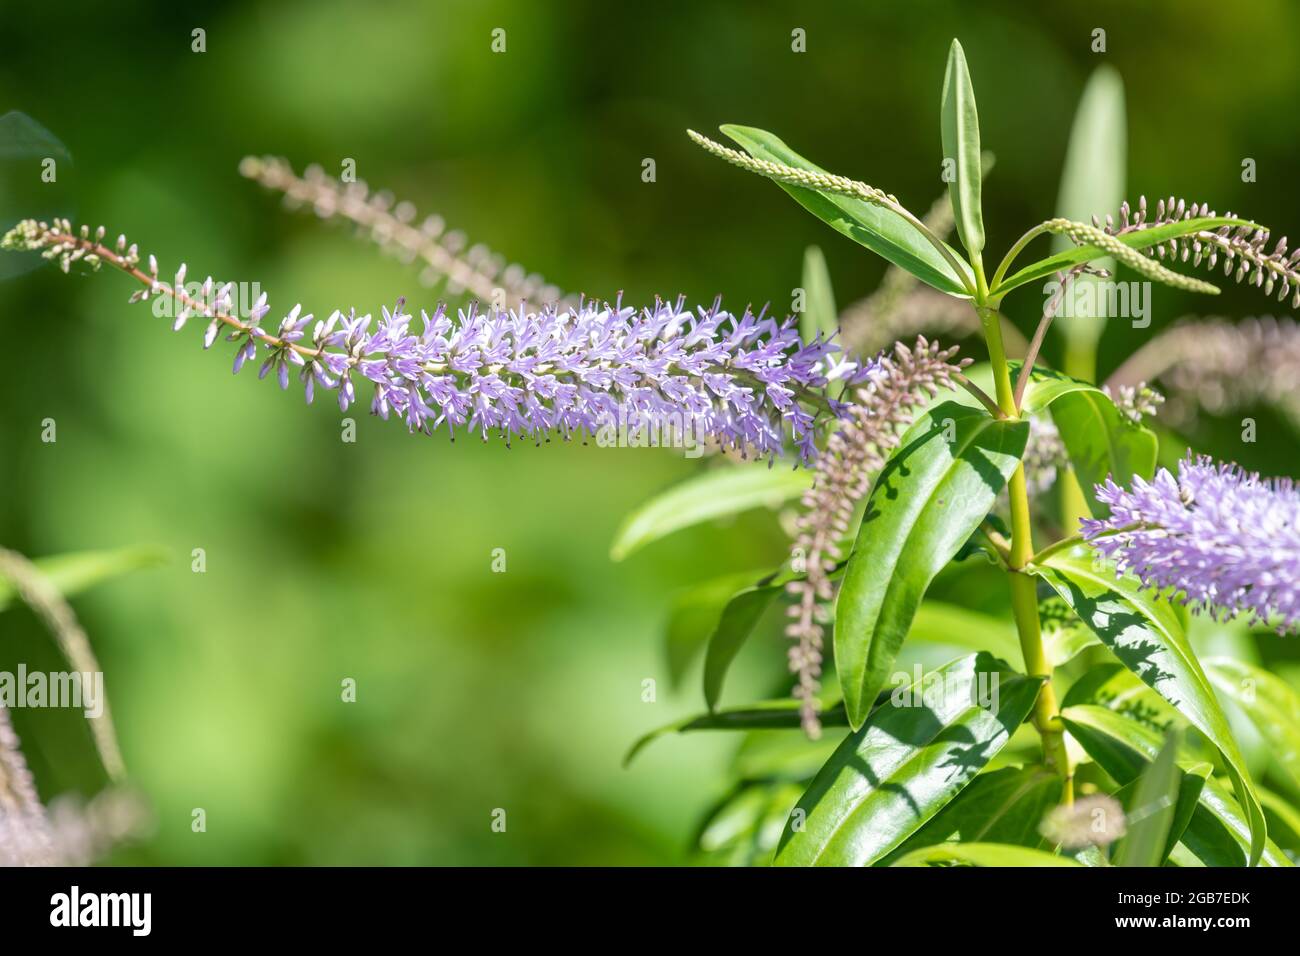 Close up of flowers on a willow leaf hebe (veronica salicifolia) plant Stock Photo